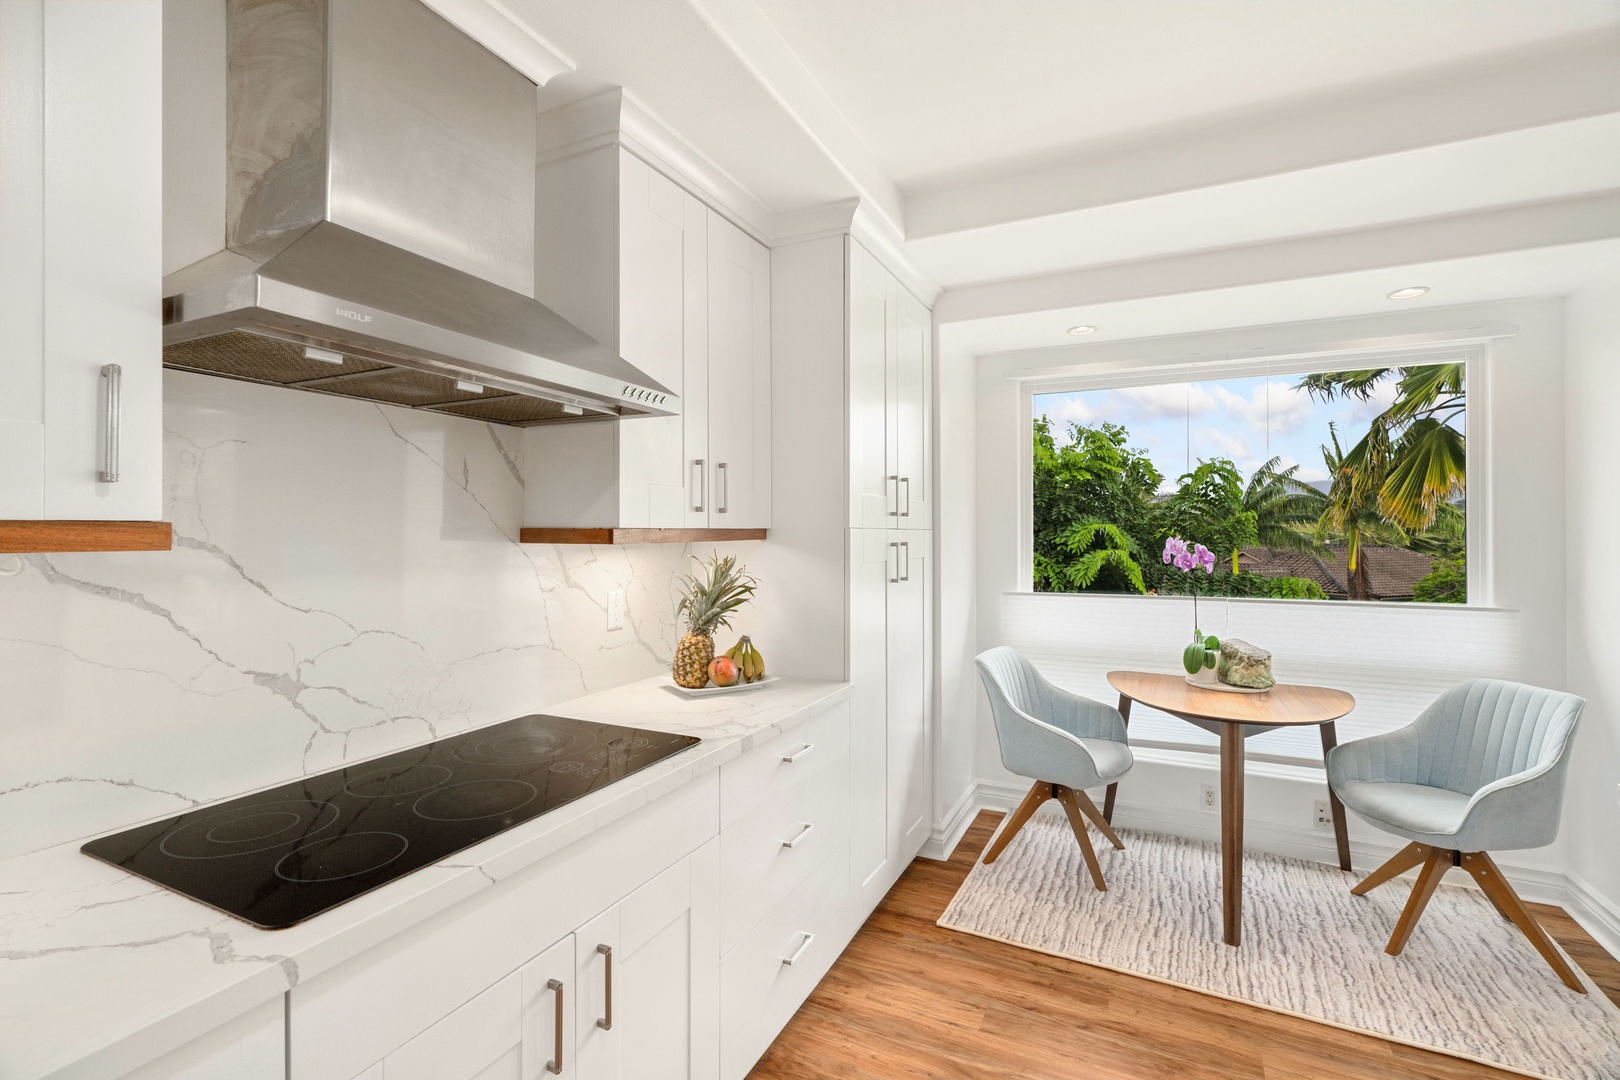 Princeville Vacation Rentals, Tropical Elegance - Sleek kitchen with a breakfast nook, perfect for vacation culinary adventures and shared quick meals.